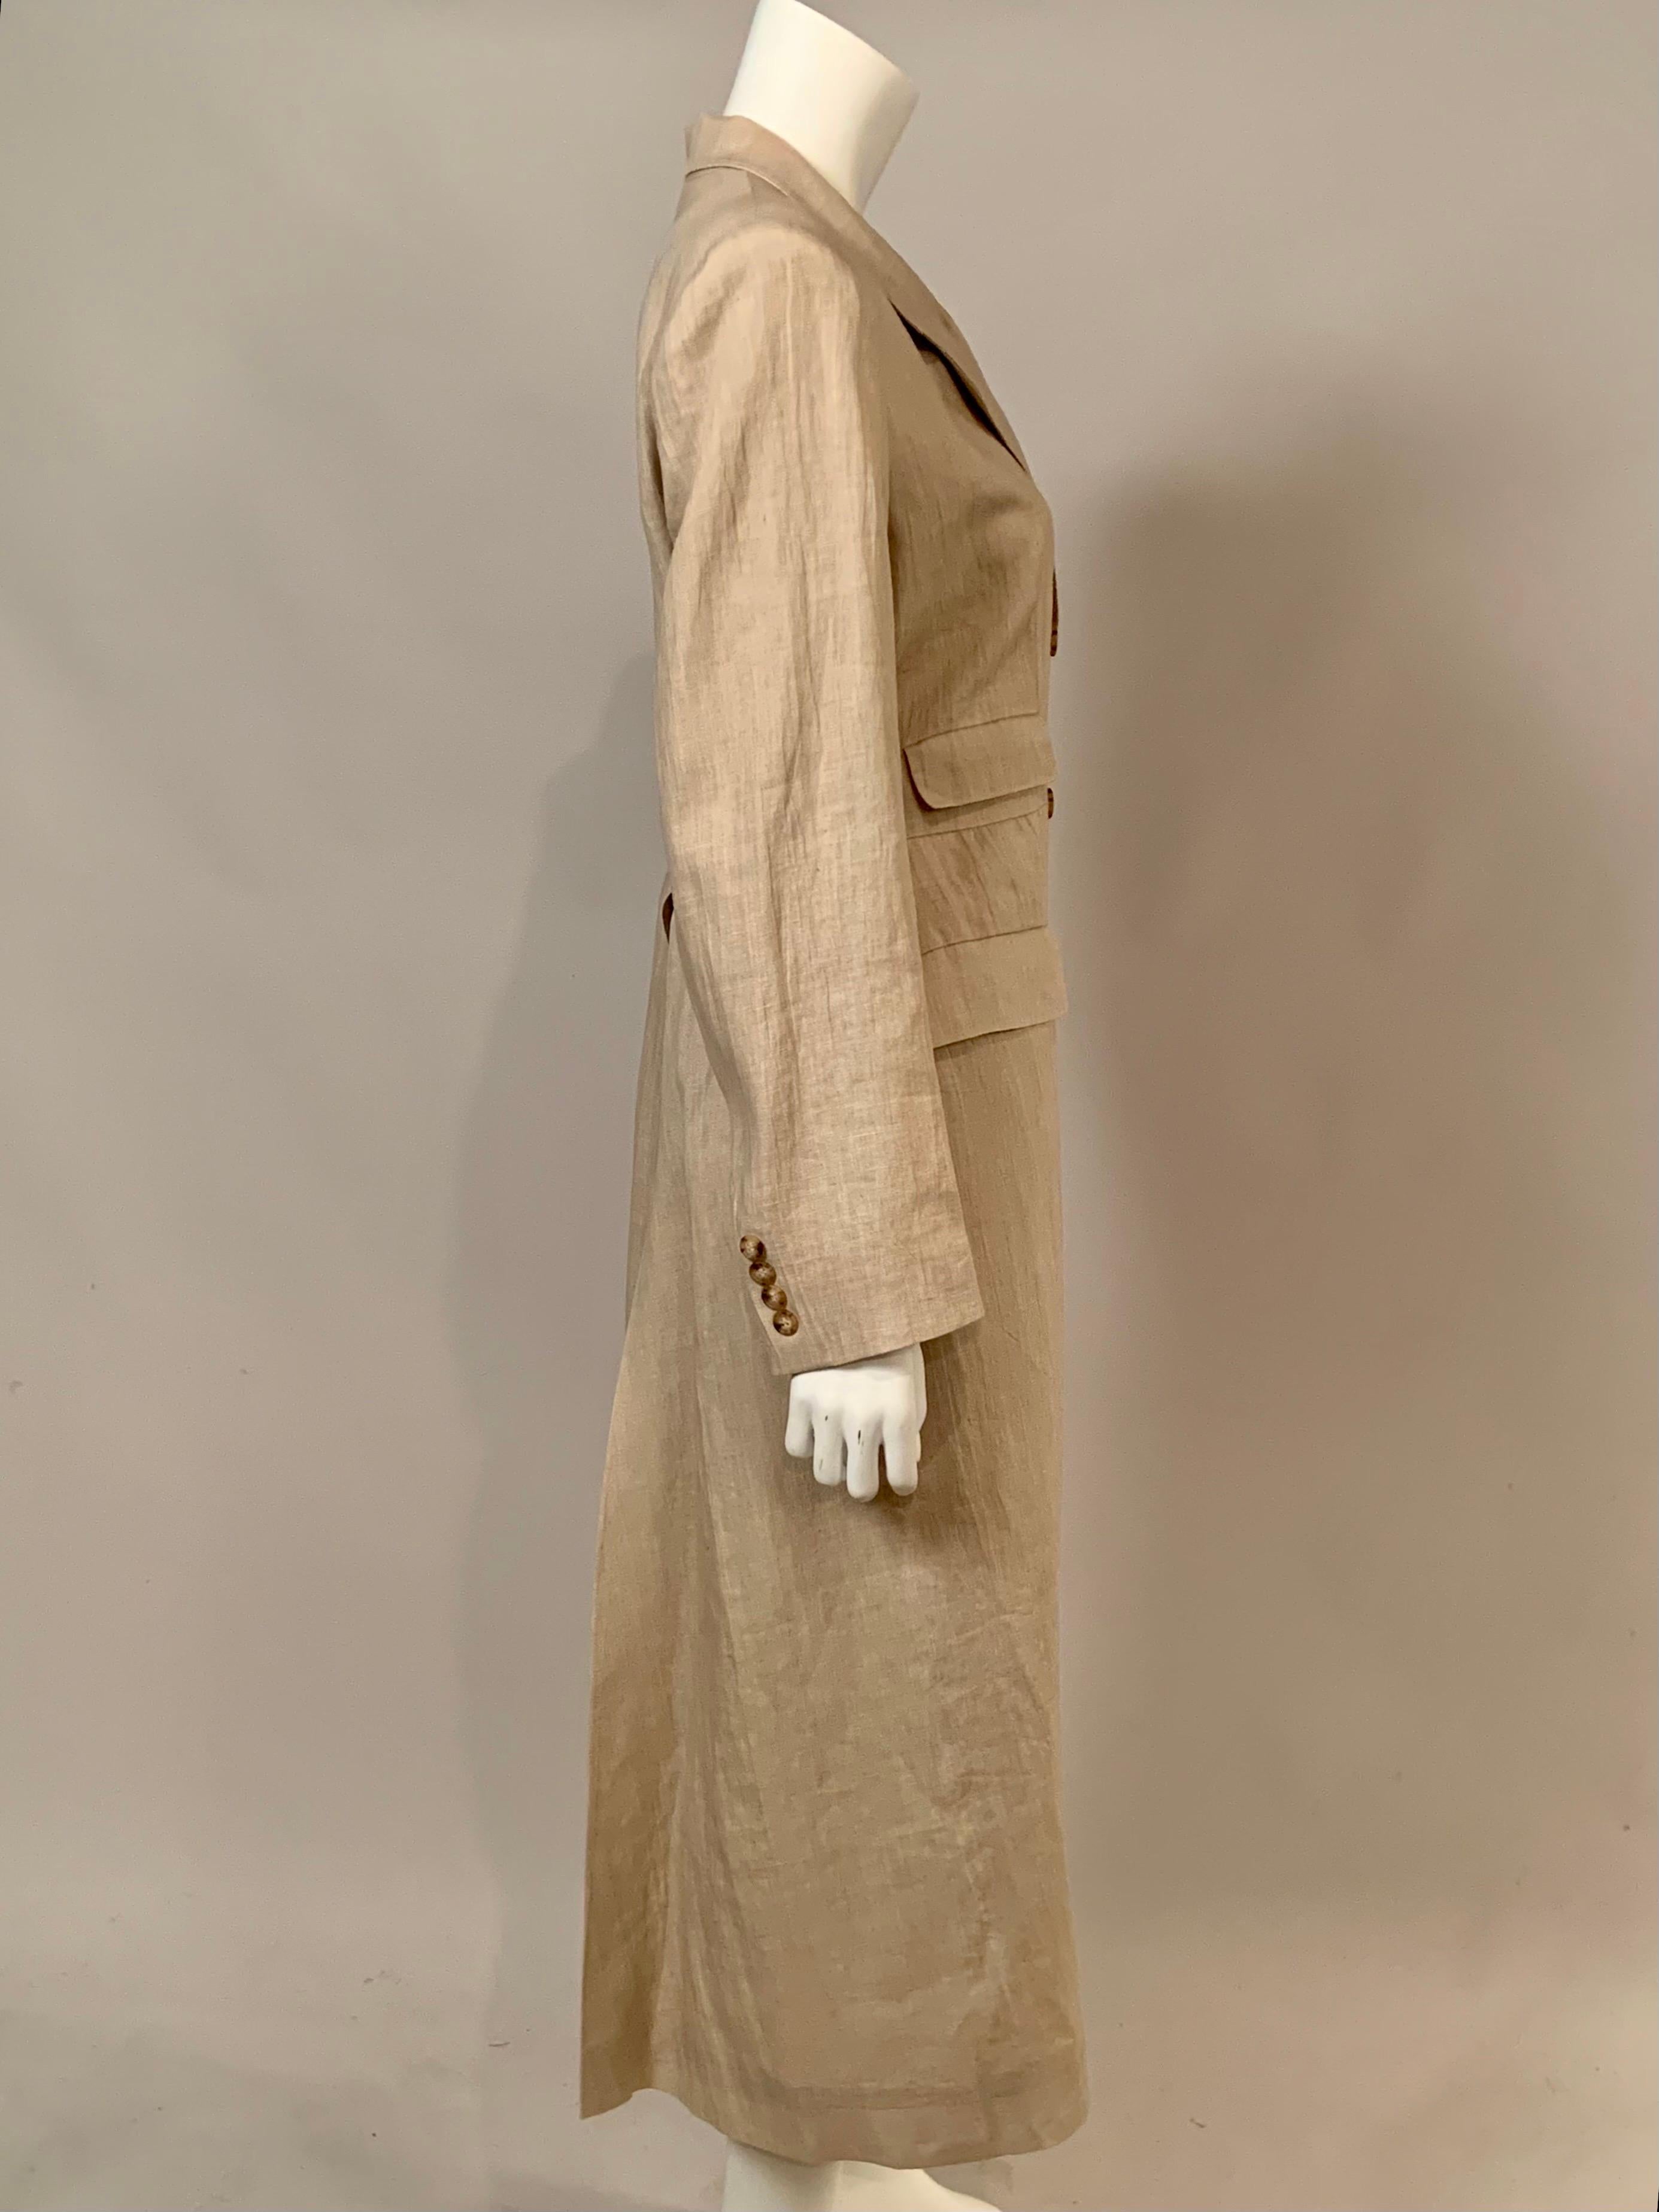 Irish Linen Duster Coat Made in Ireland by Willis & Geiger Outfitters For Sale 6